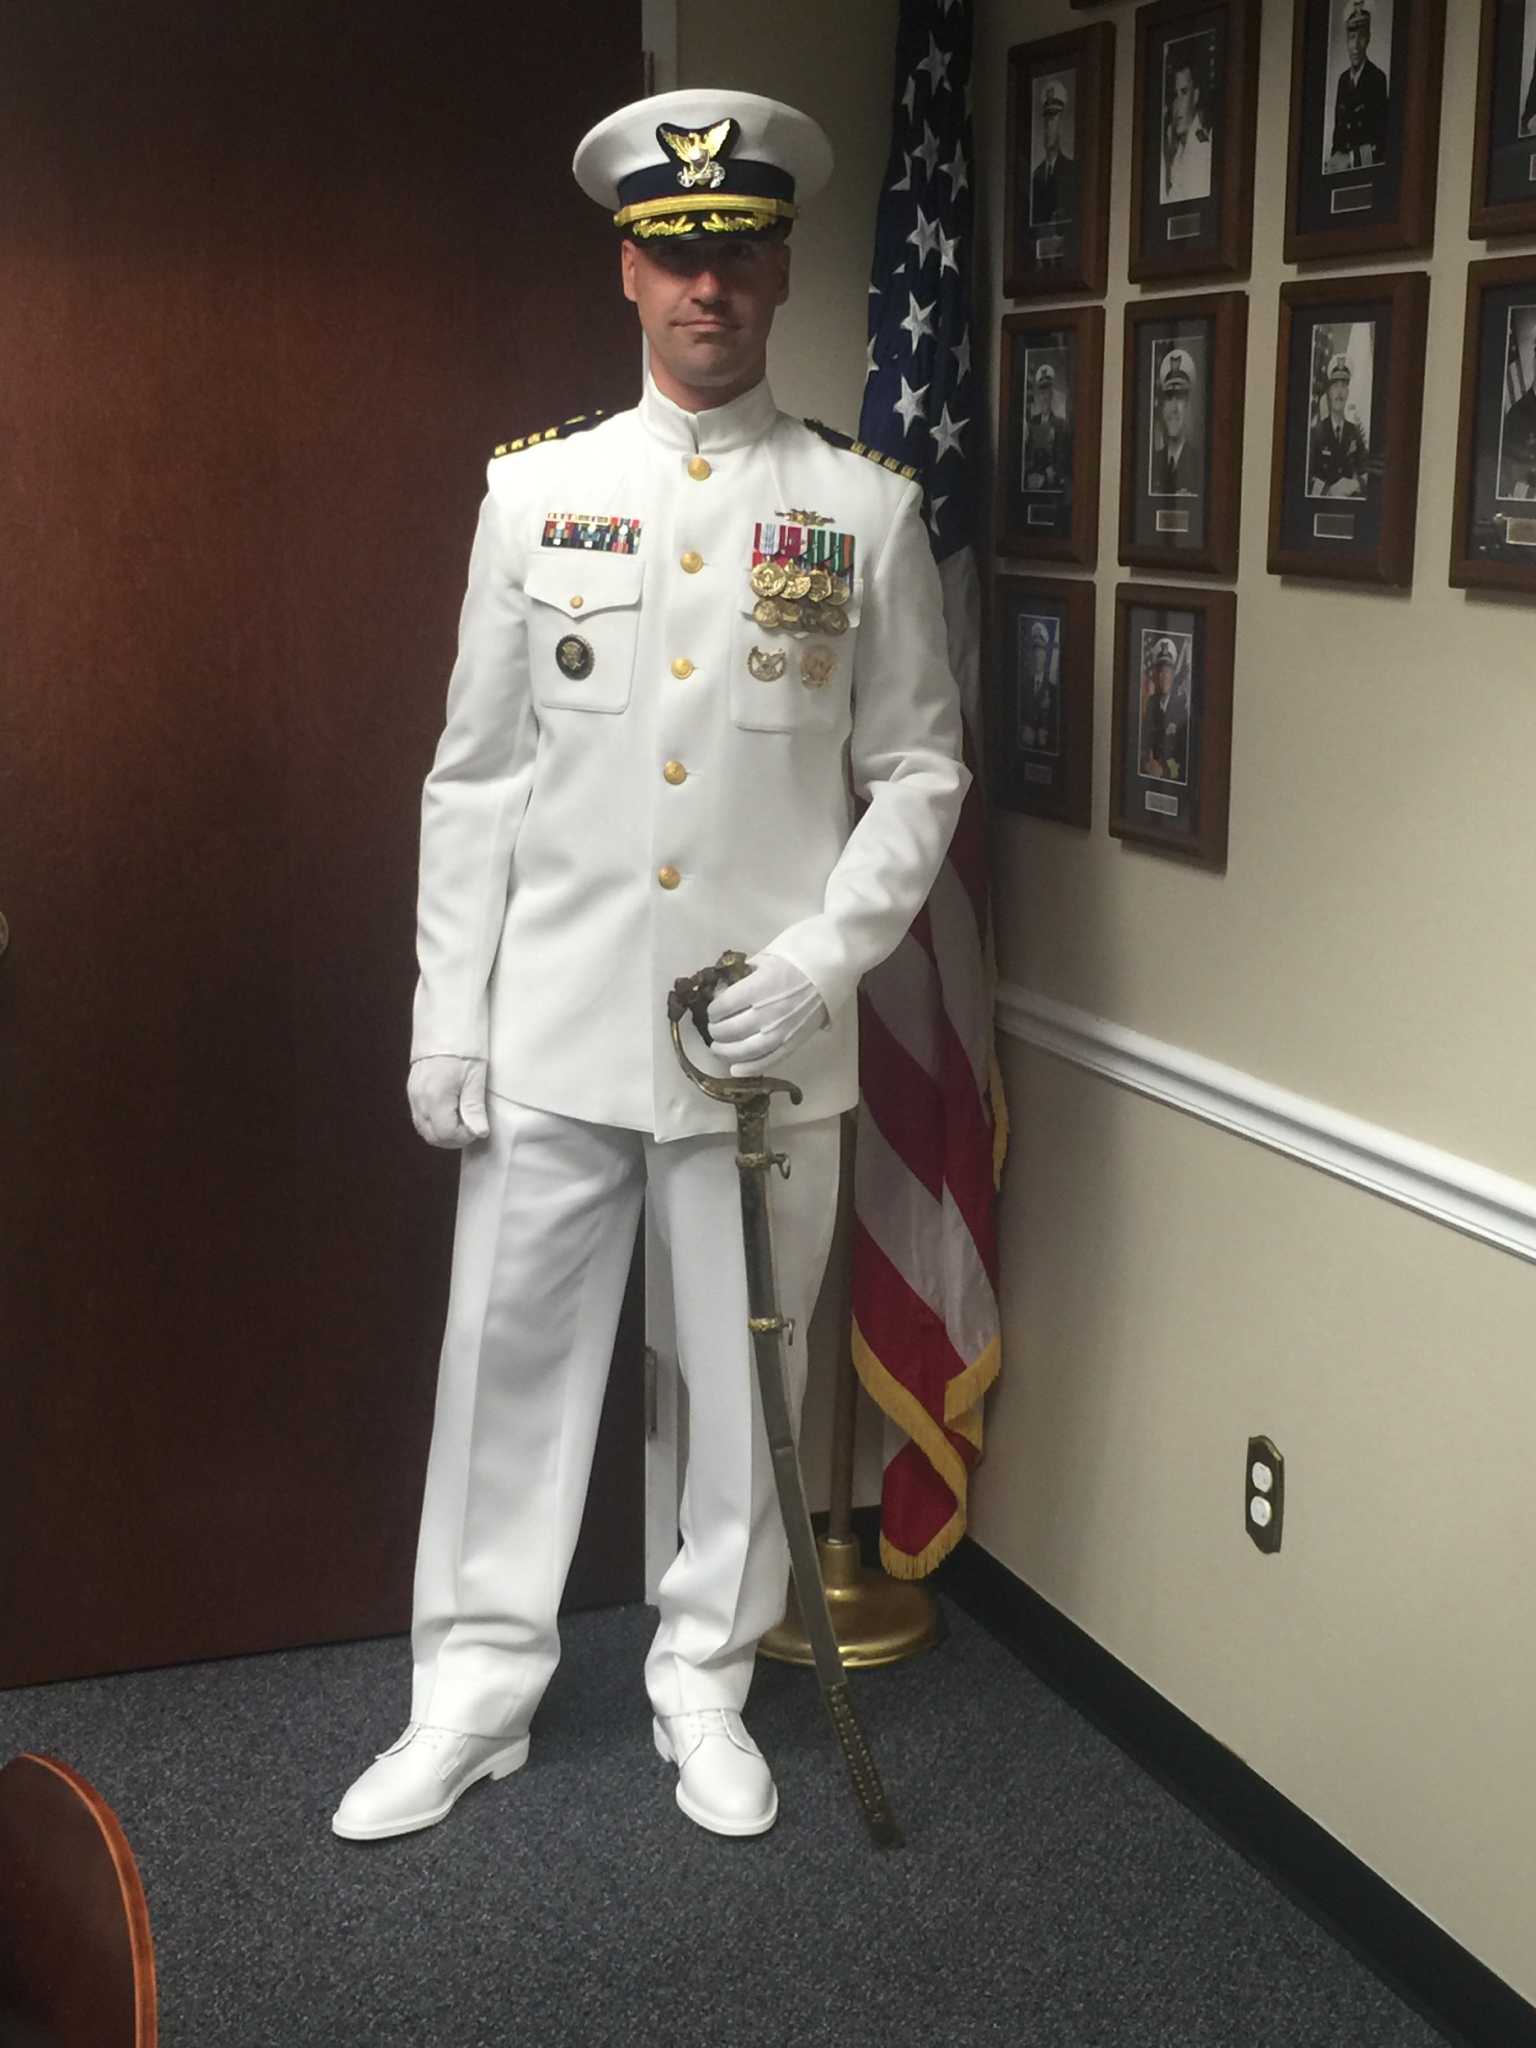 New Coast Guard captain leads Telecommunications and Information Command